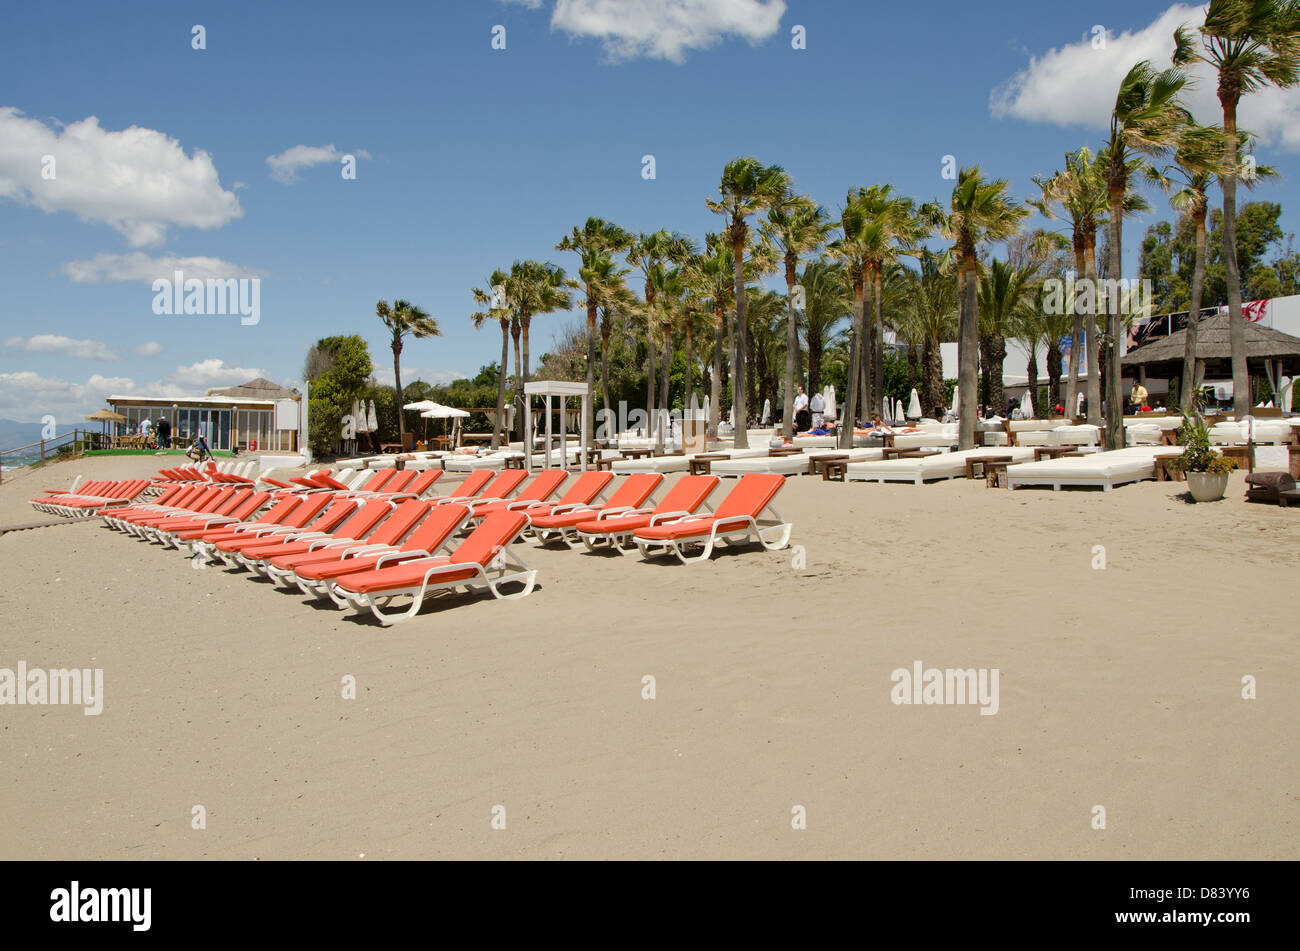 Nikki Beach luxury beach Marbella with red empty and palm trees waving, Costa del Sol, Stock Photo - Alamy